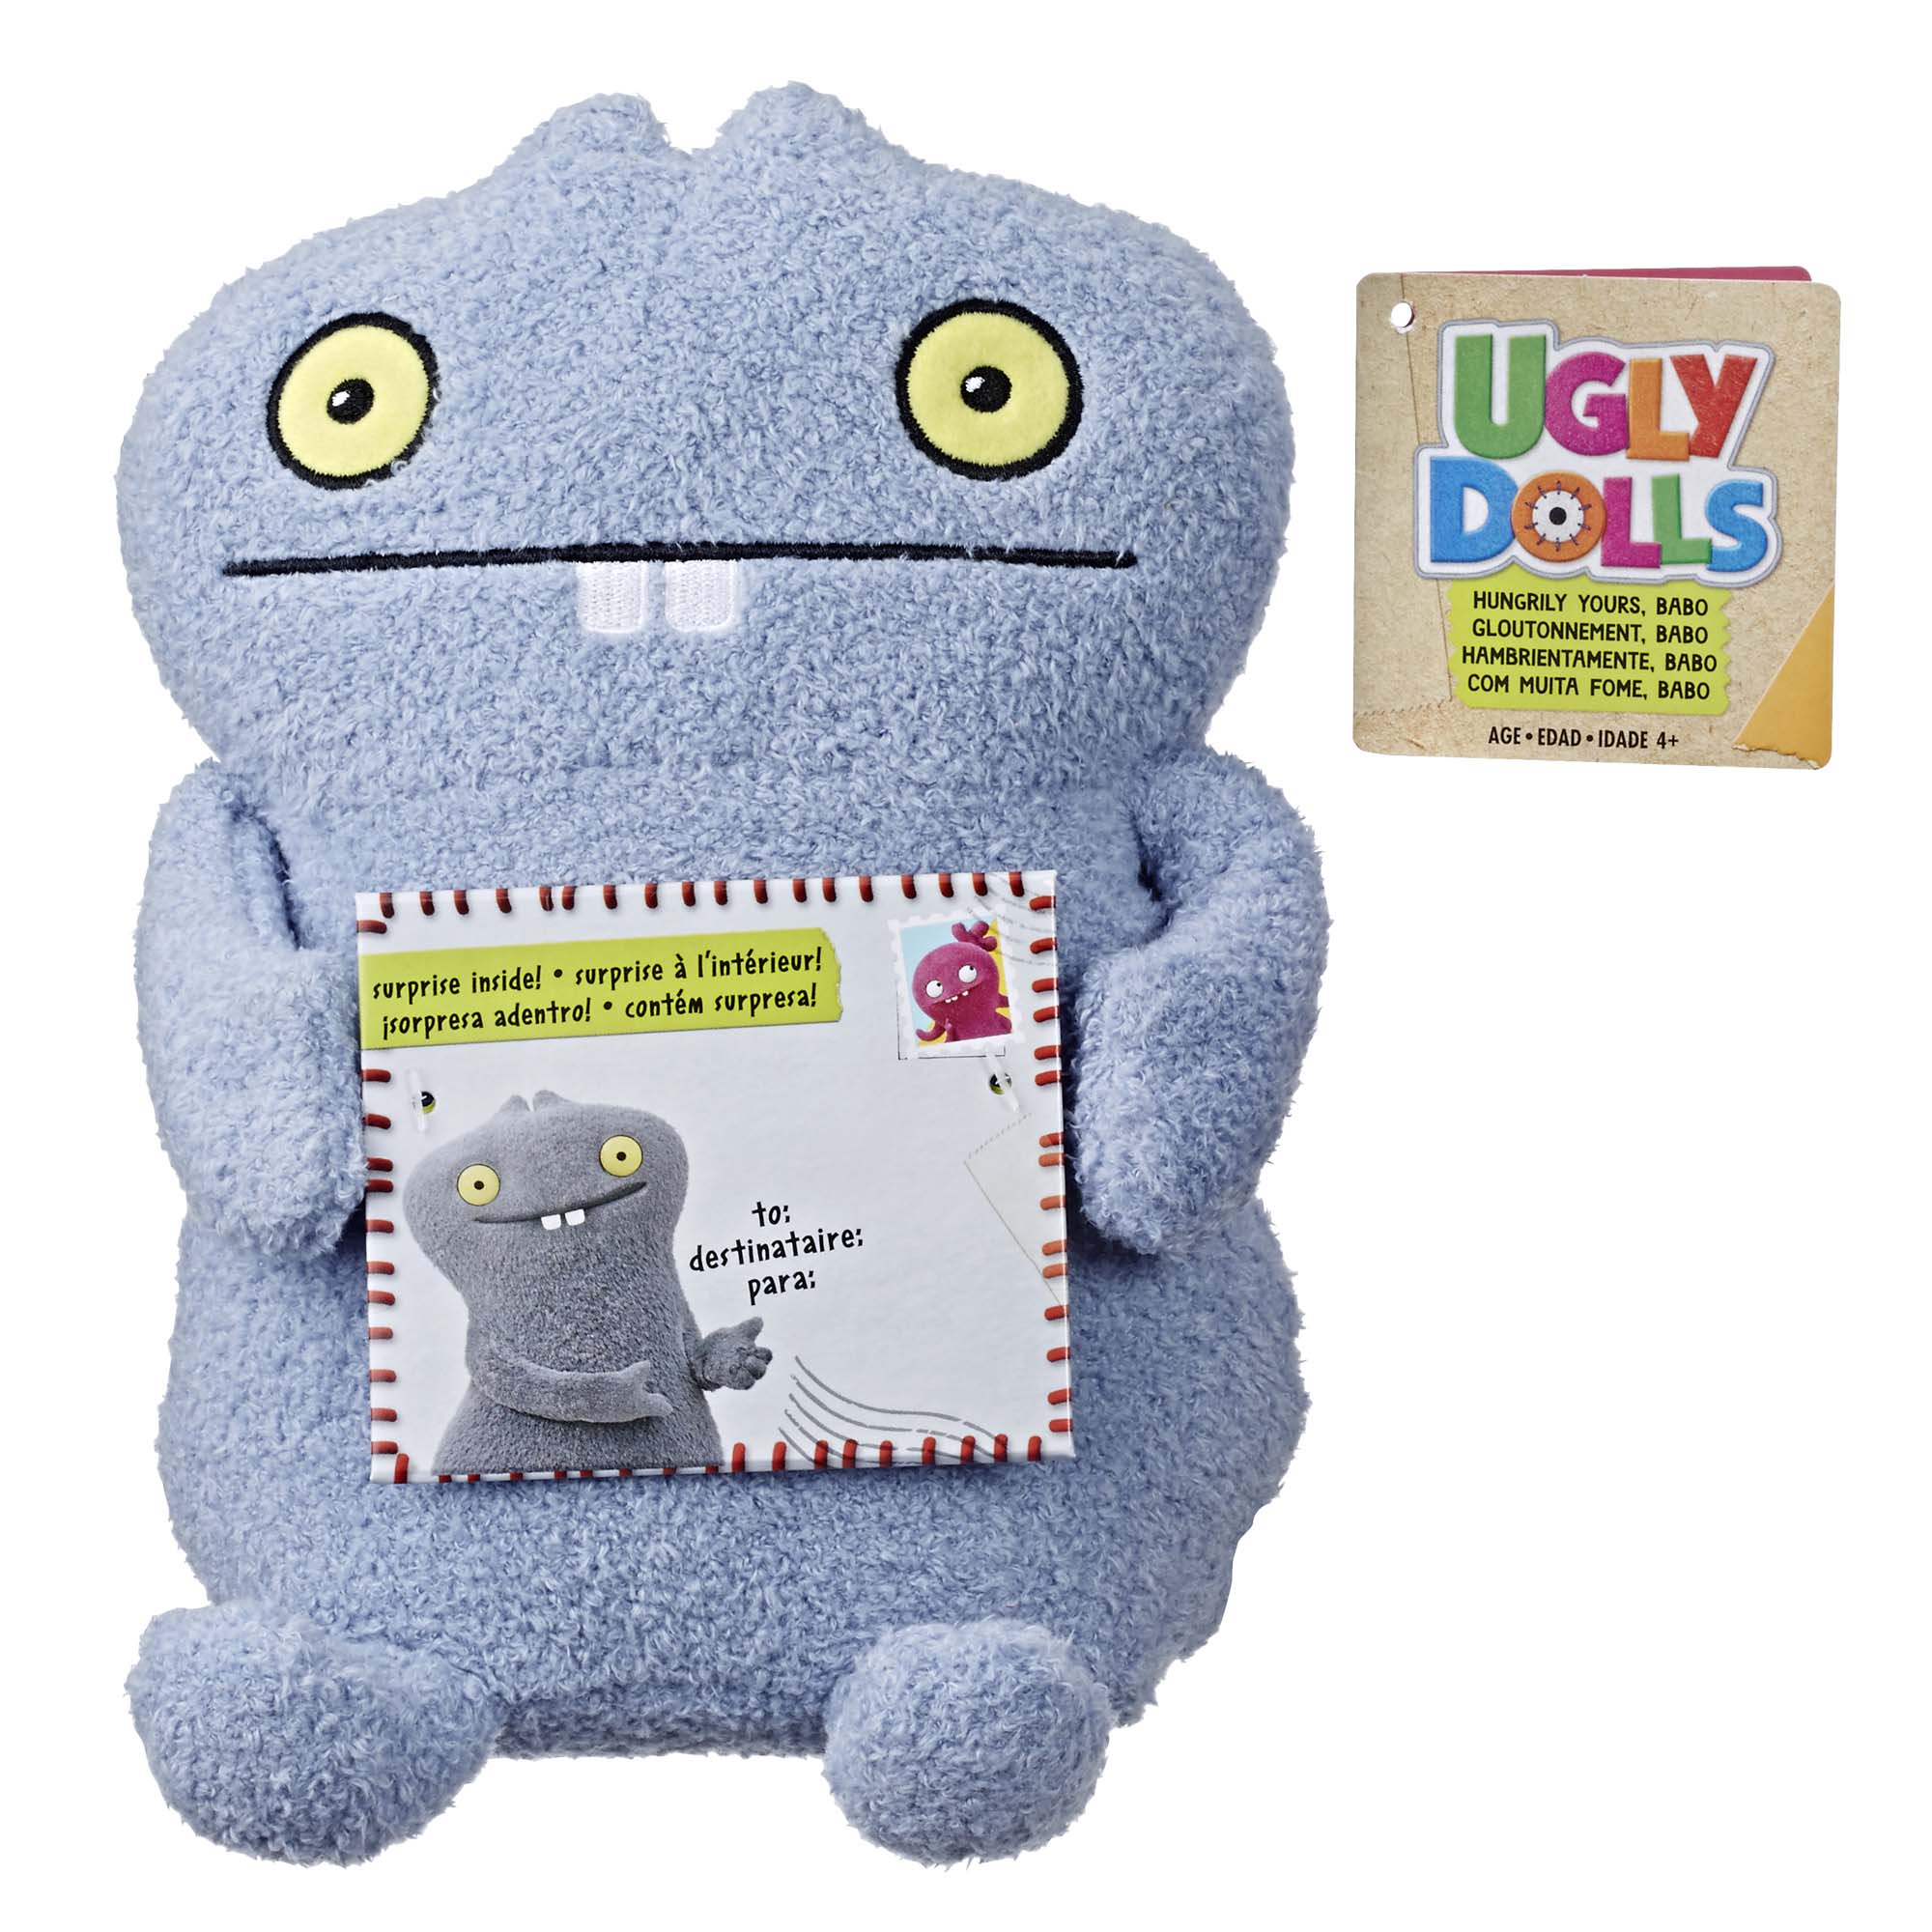 UglyDolls Hungrily Yours Babo Stuffed Plush Toy, 10.5 inches tall - image 5 of 8